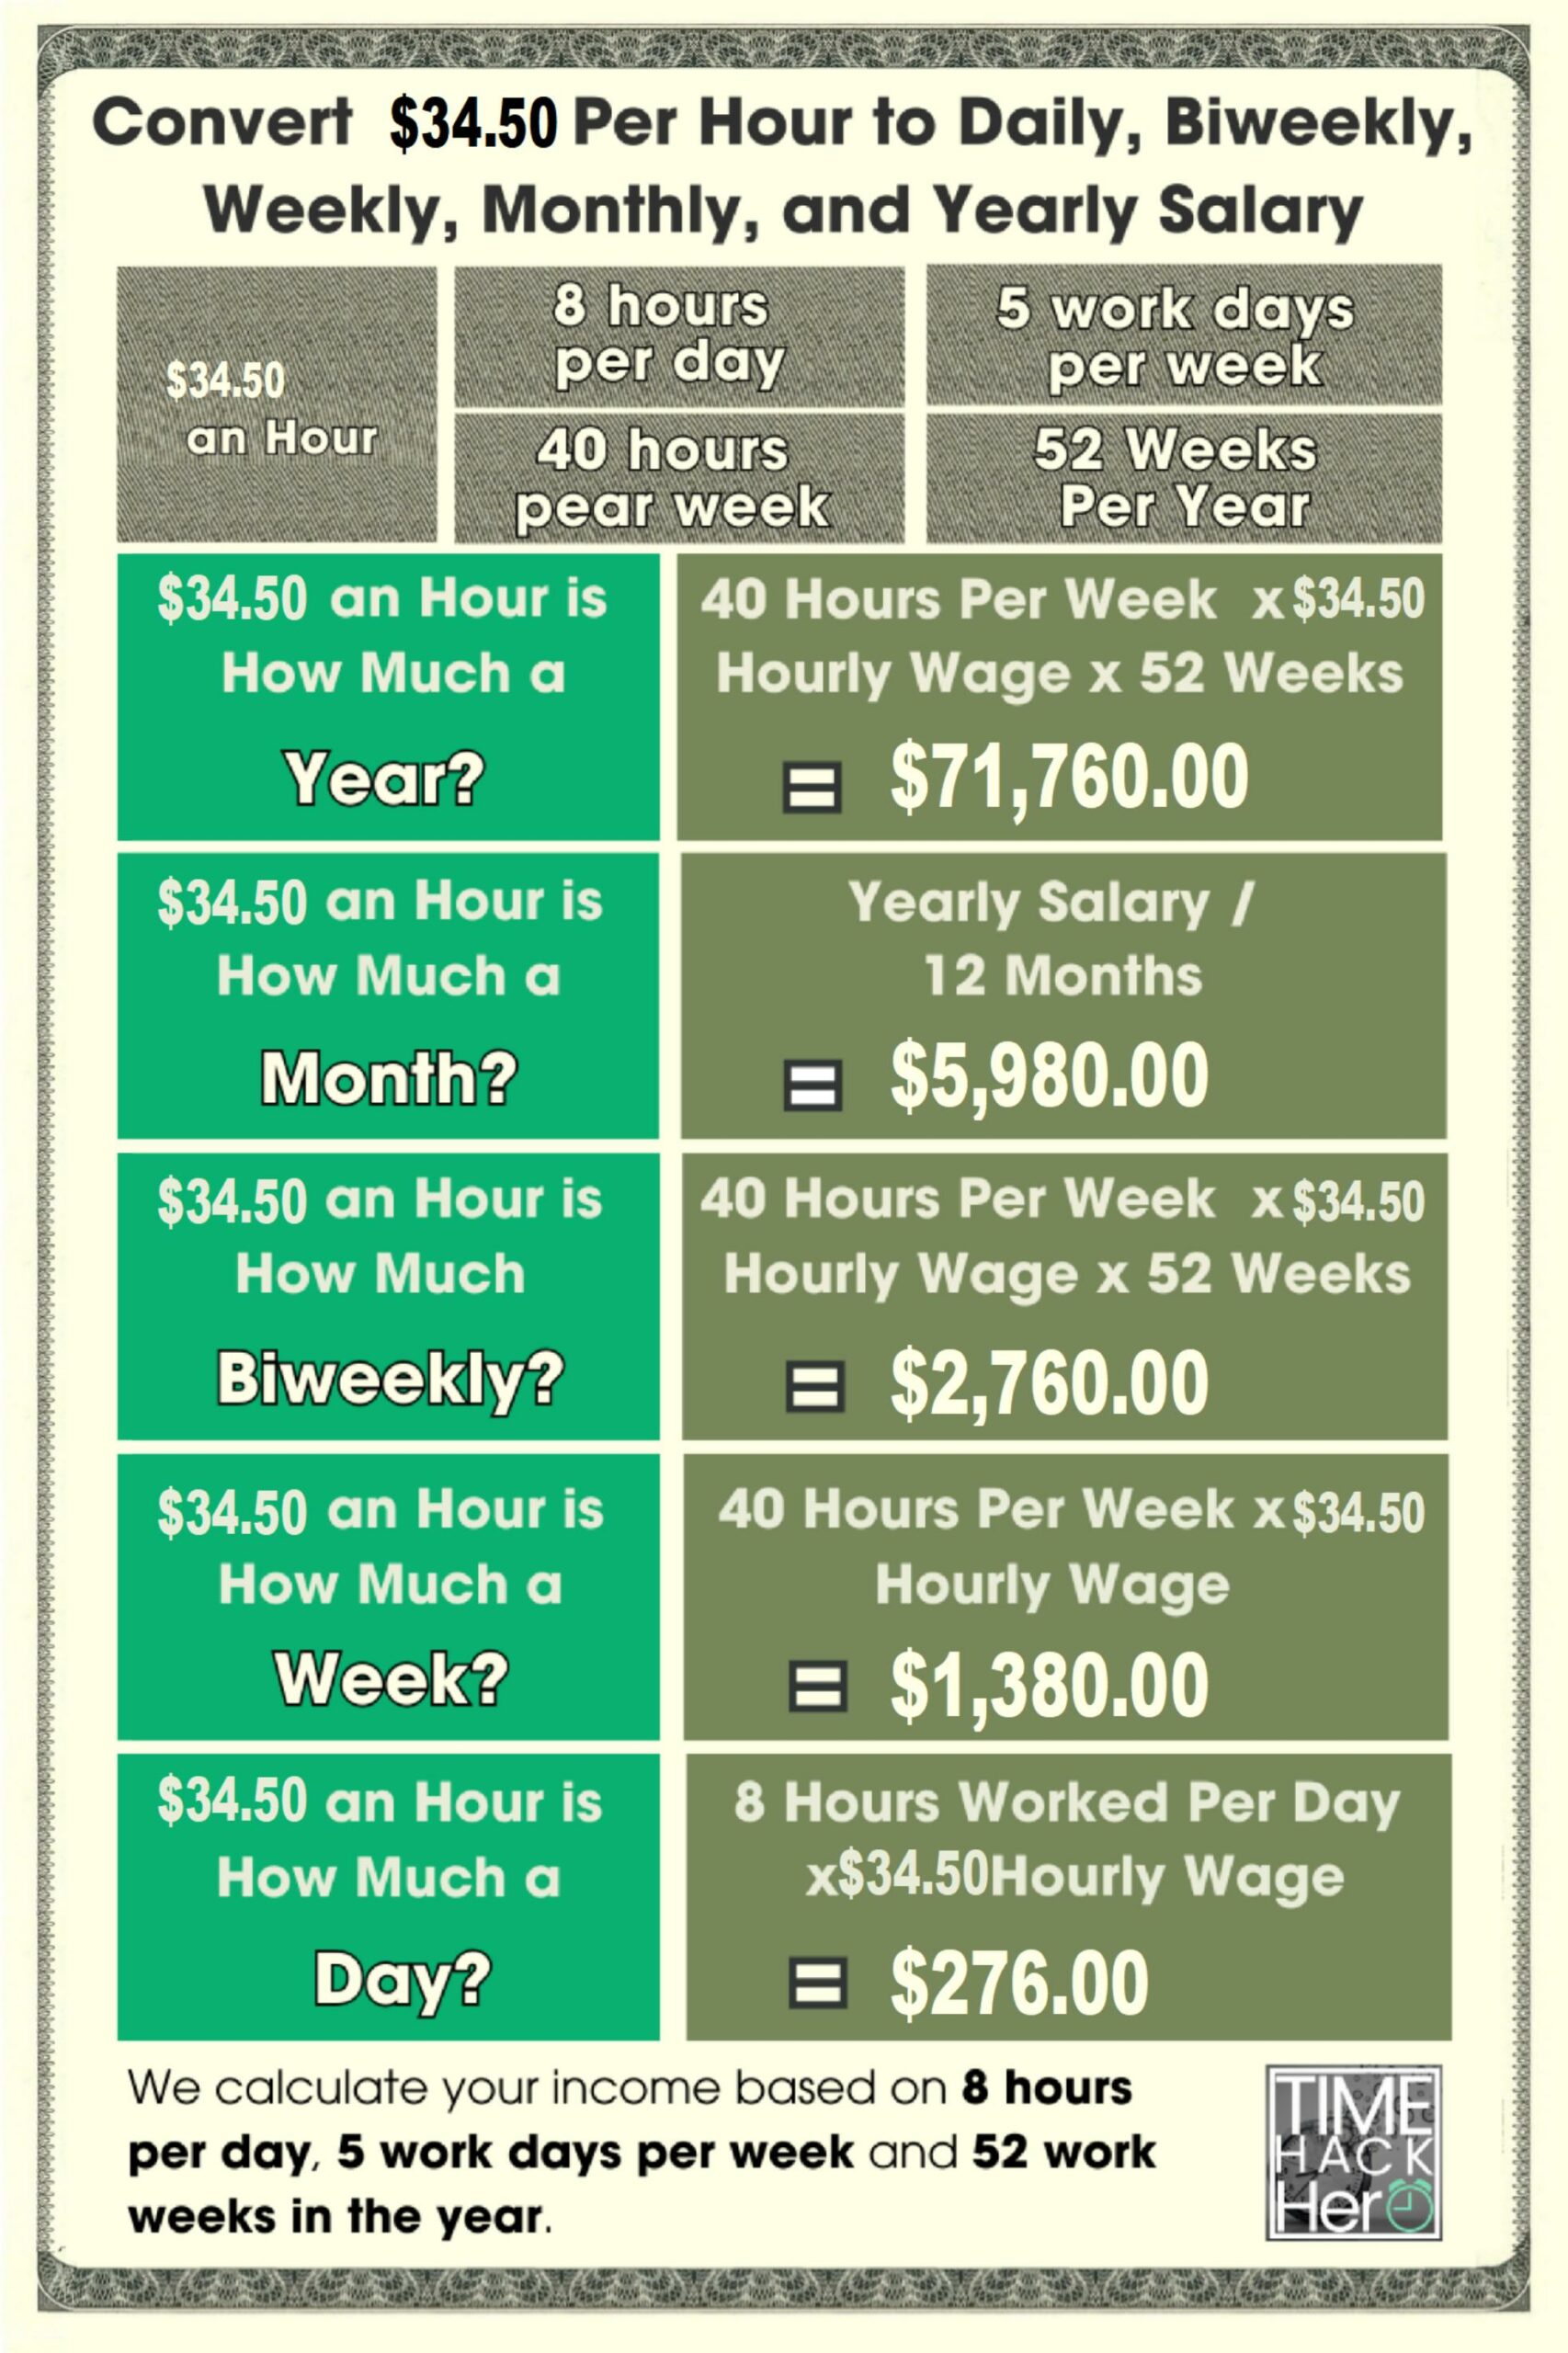 Convert $34.50 Per Hour to Weekly, Monthly, and Yearly Salary